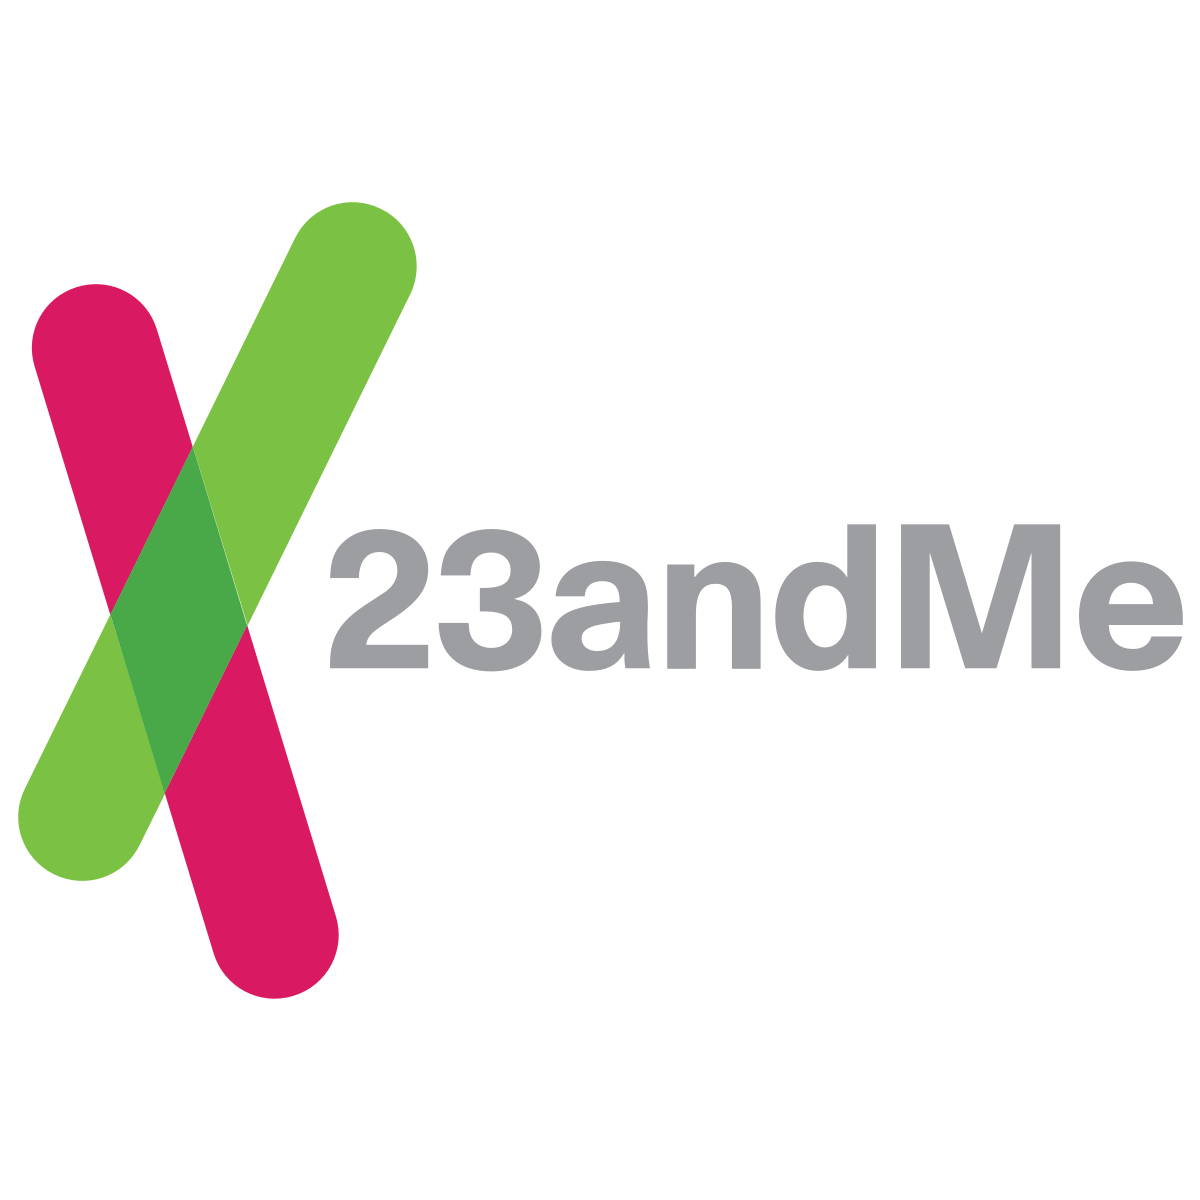 23 and Me Logo - Our Health + Ancestry DNA Service